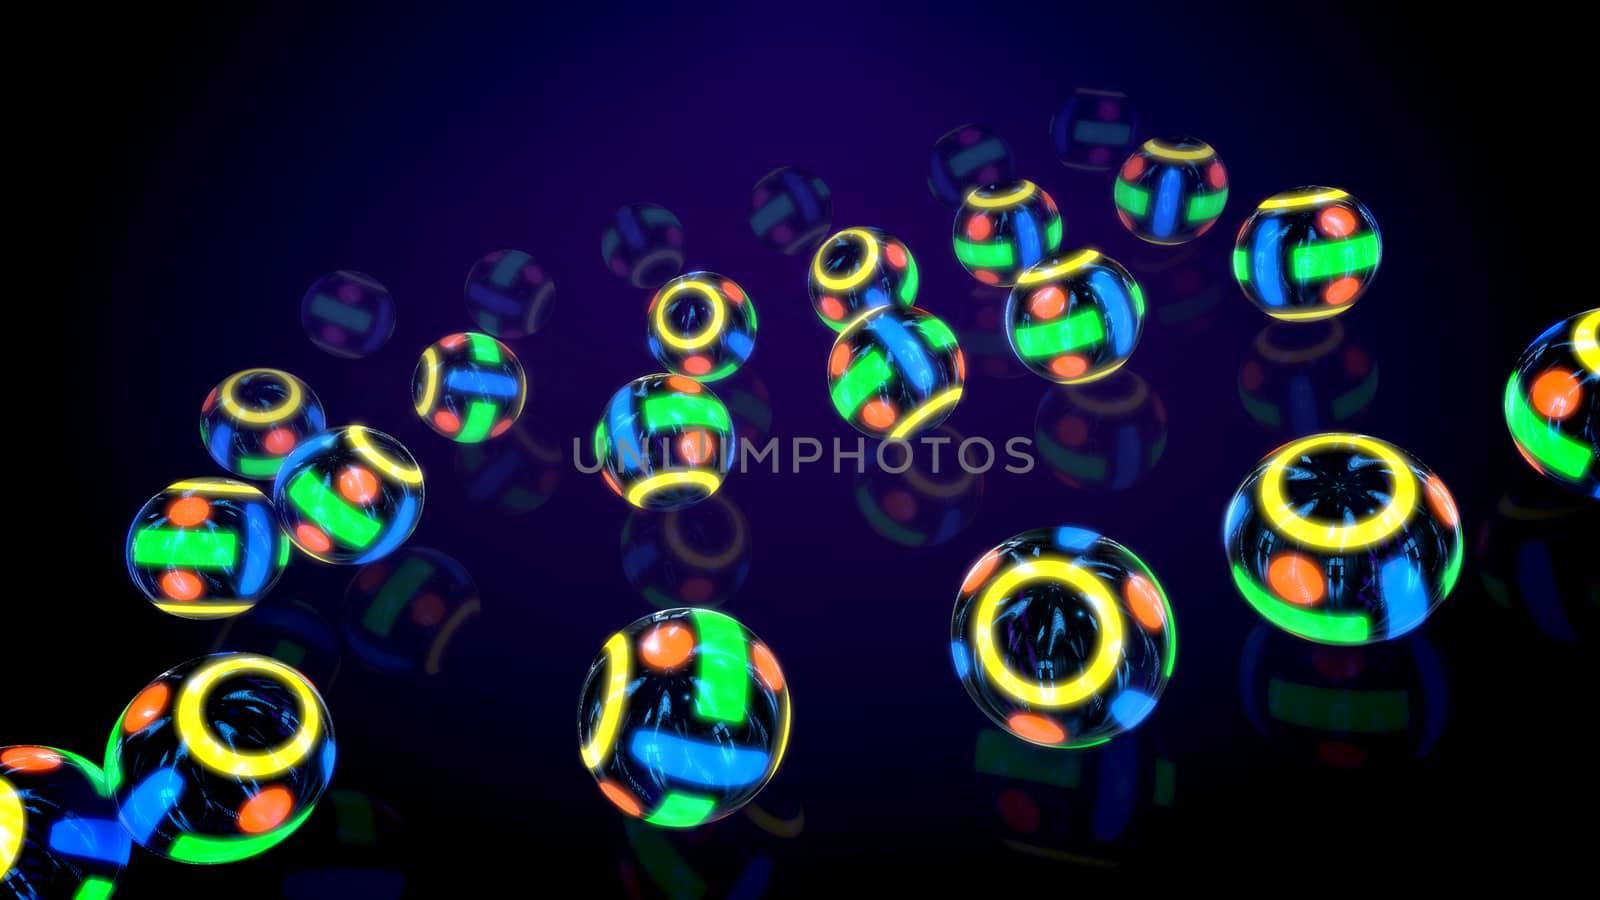 Celebratory 3d illustration of four rows of sparkling multicolored neon balls placed on one flat surfece in the black background. They generate the mood of optimism, celebration and fest.